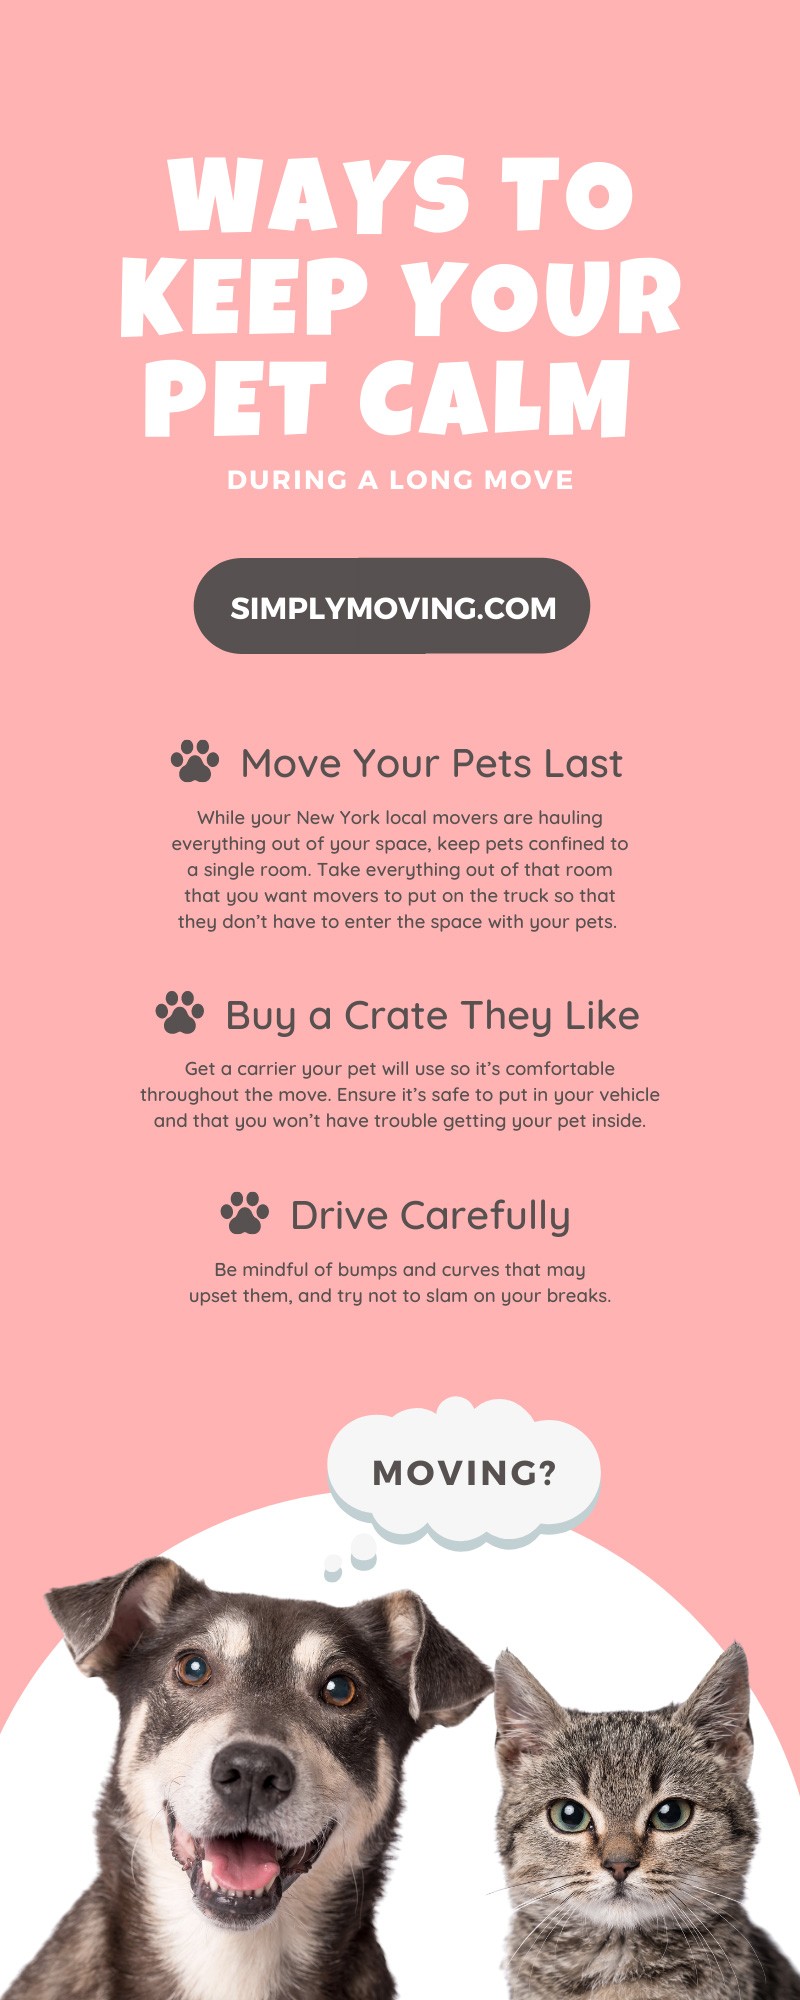 10 Ways To Keep Your Pet Calm During a Long Move